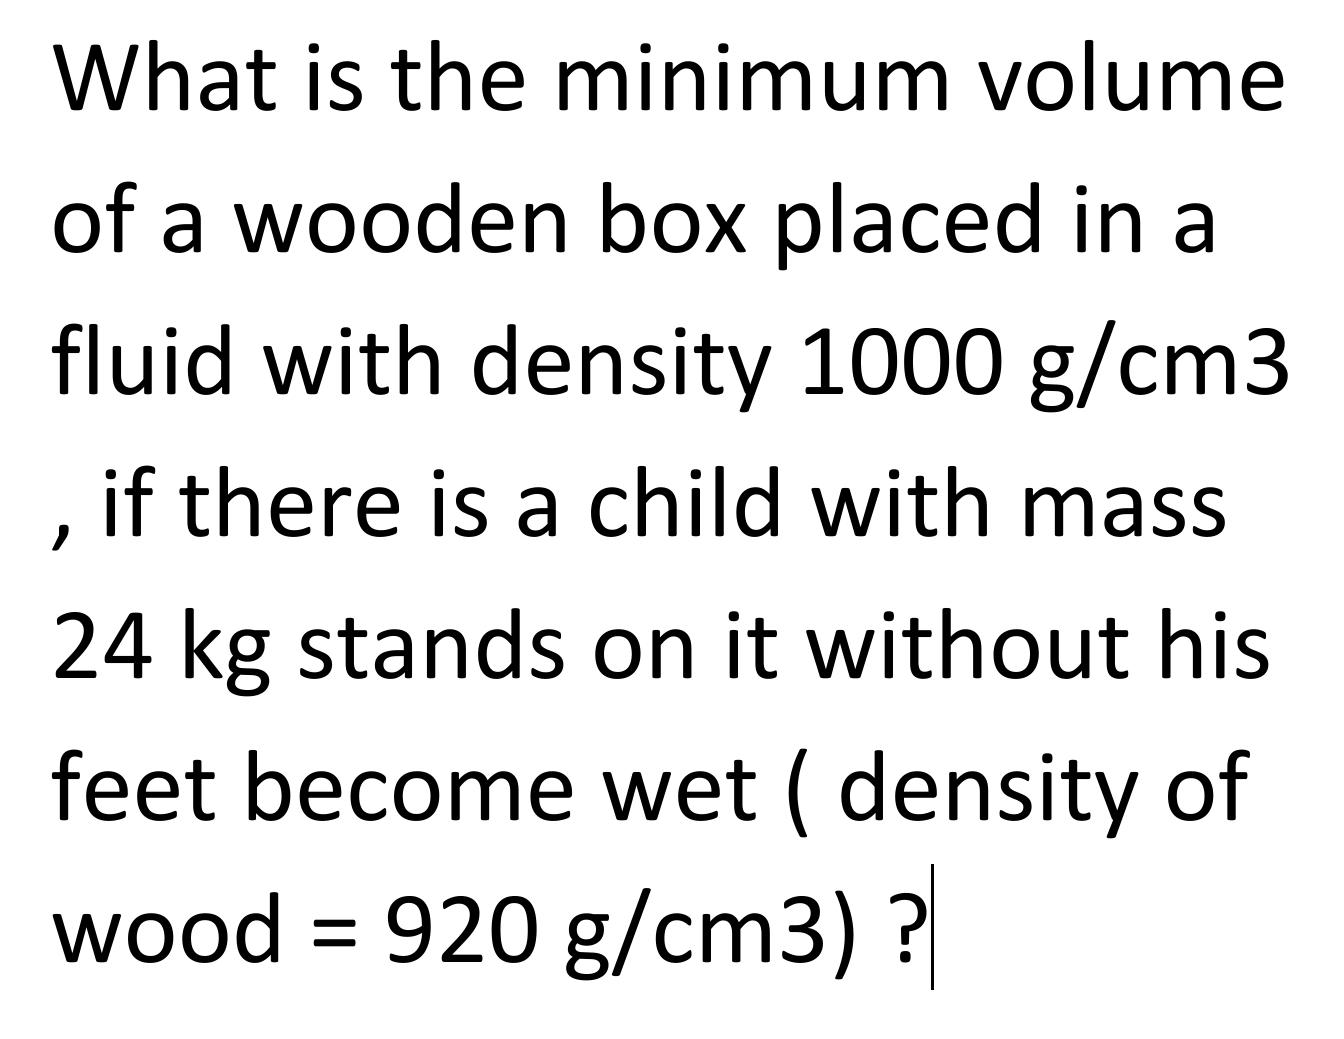 What is the minimum volume of a wooden box placed in a fluid with density 1000 g/cm3 if there is a child with